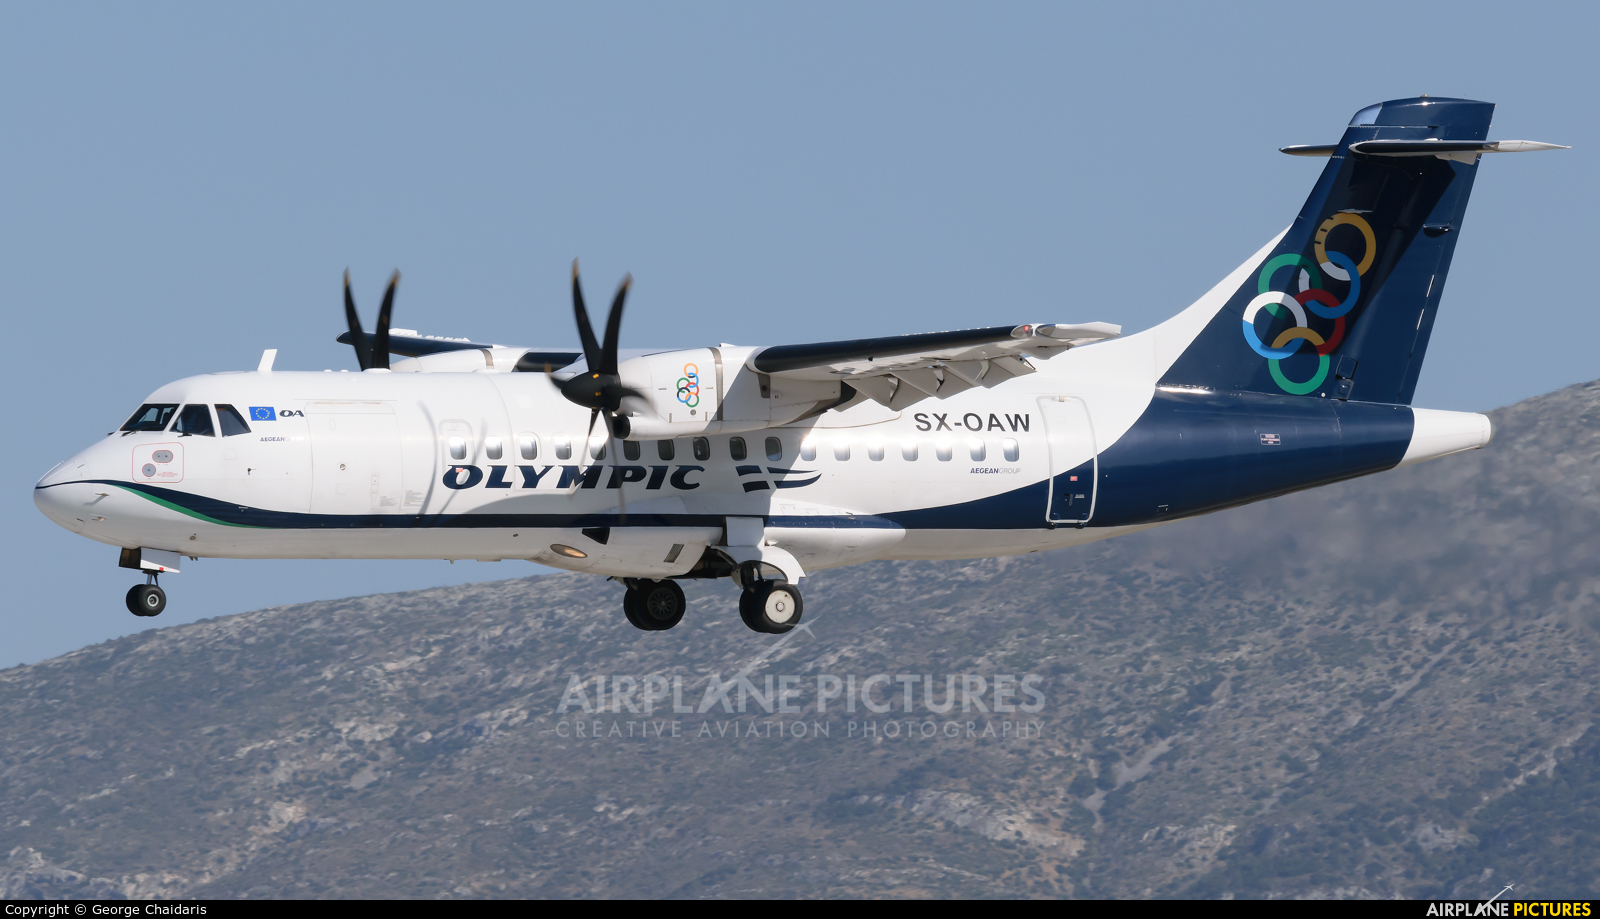 Olympic Airlines SX-OAW aircraft at Athens - Eleftherios Venizelos